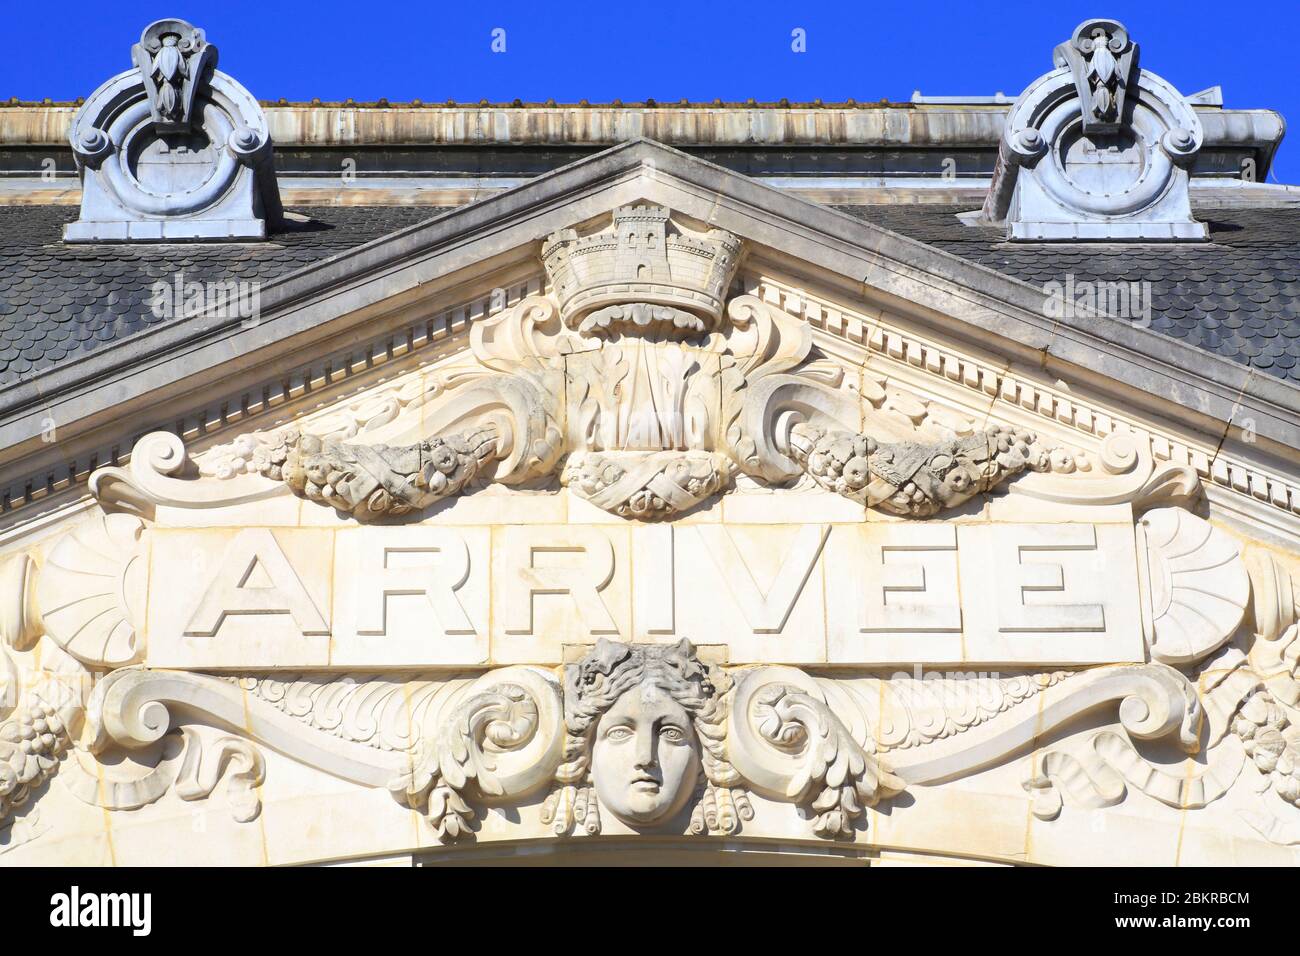 France, Haute Vienne, Limoges, railway station of Limoges Benedictins inaugurated in 1929 and eclectic masterpiece of regionalist architecture with a mixture of late Art Nouveau, Art Deco and neoclassicism, detail of the facade Stock Photo